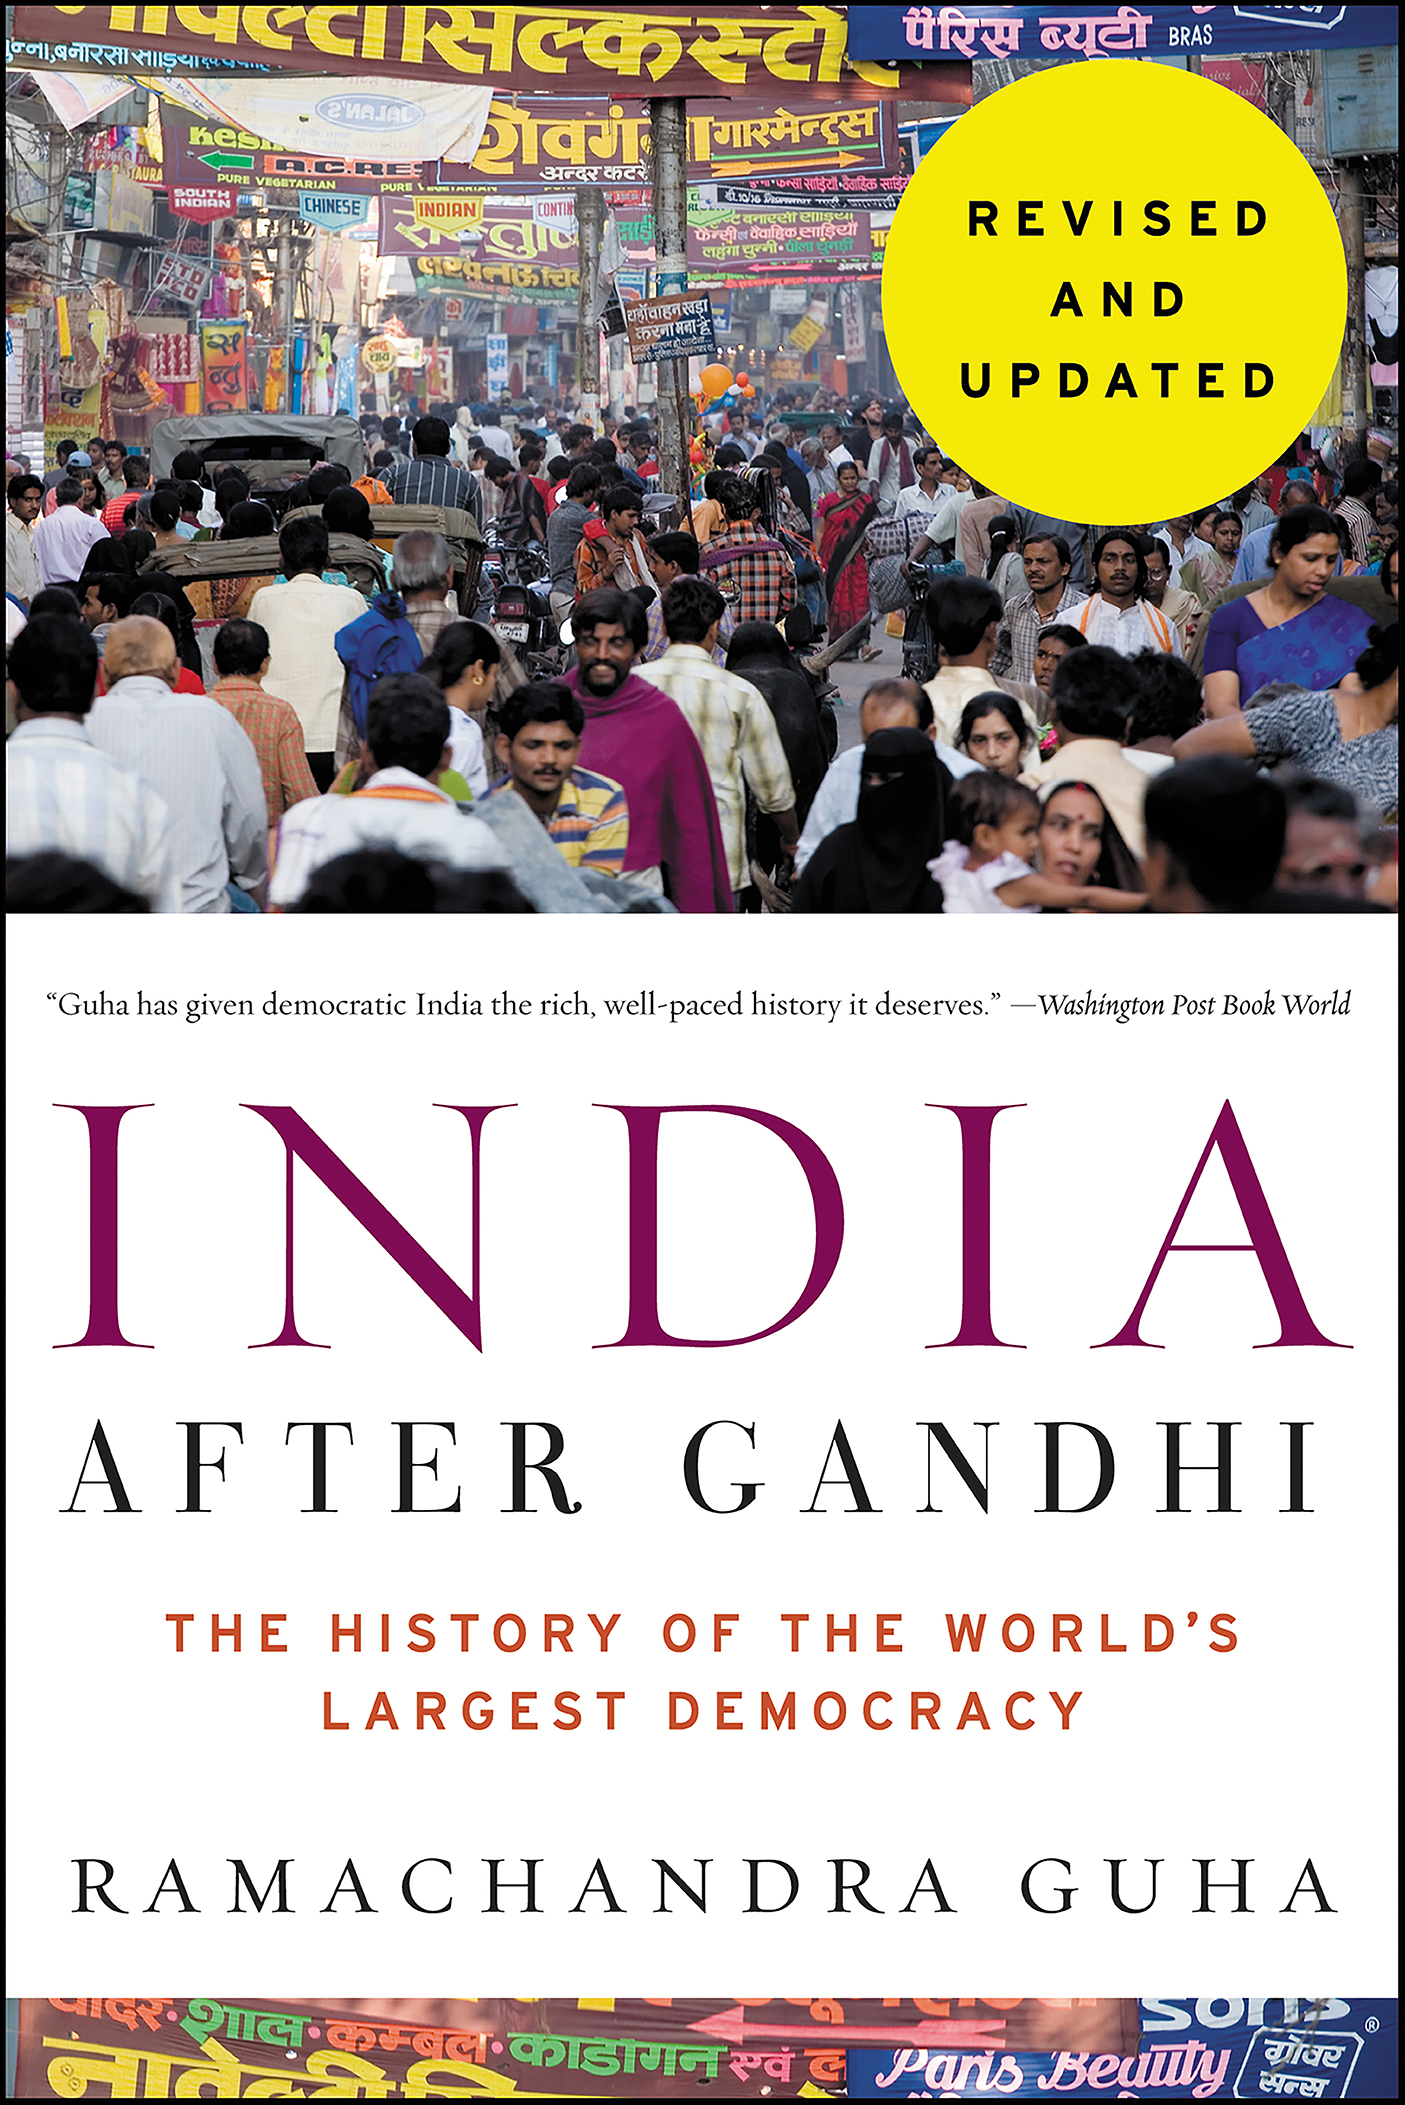 India after Gandhi the history of the world's largest democracy cover image